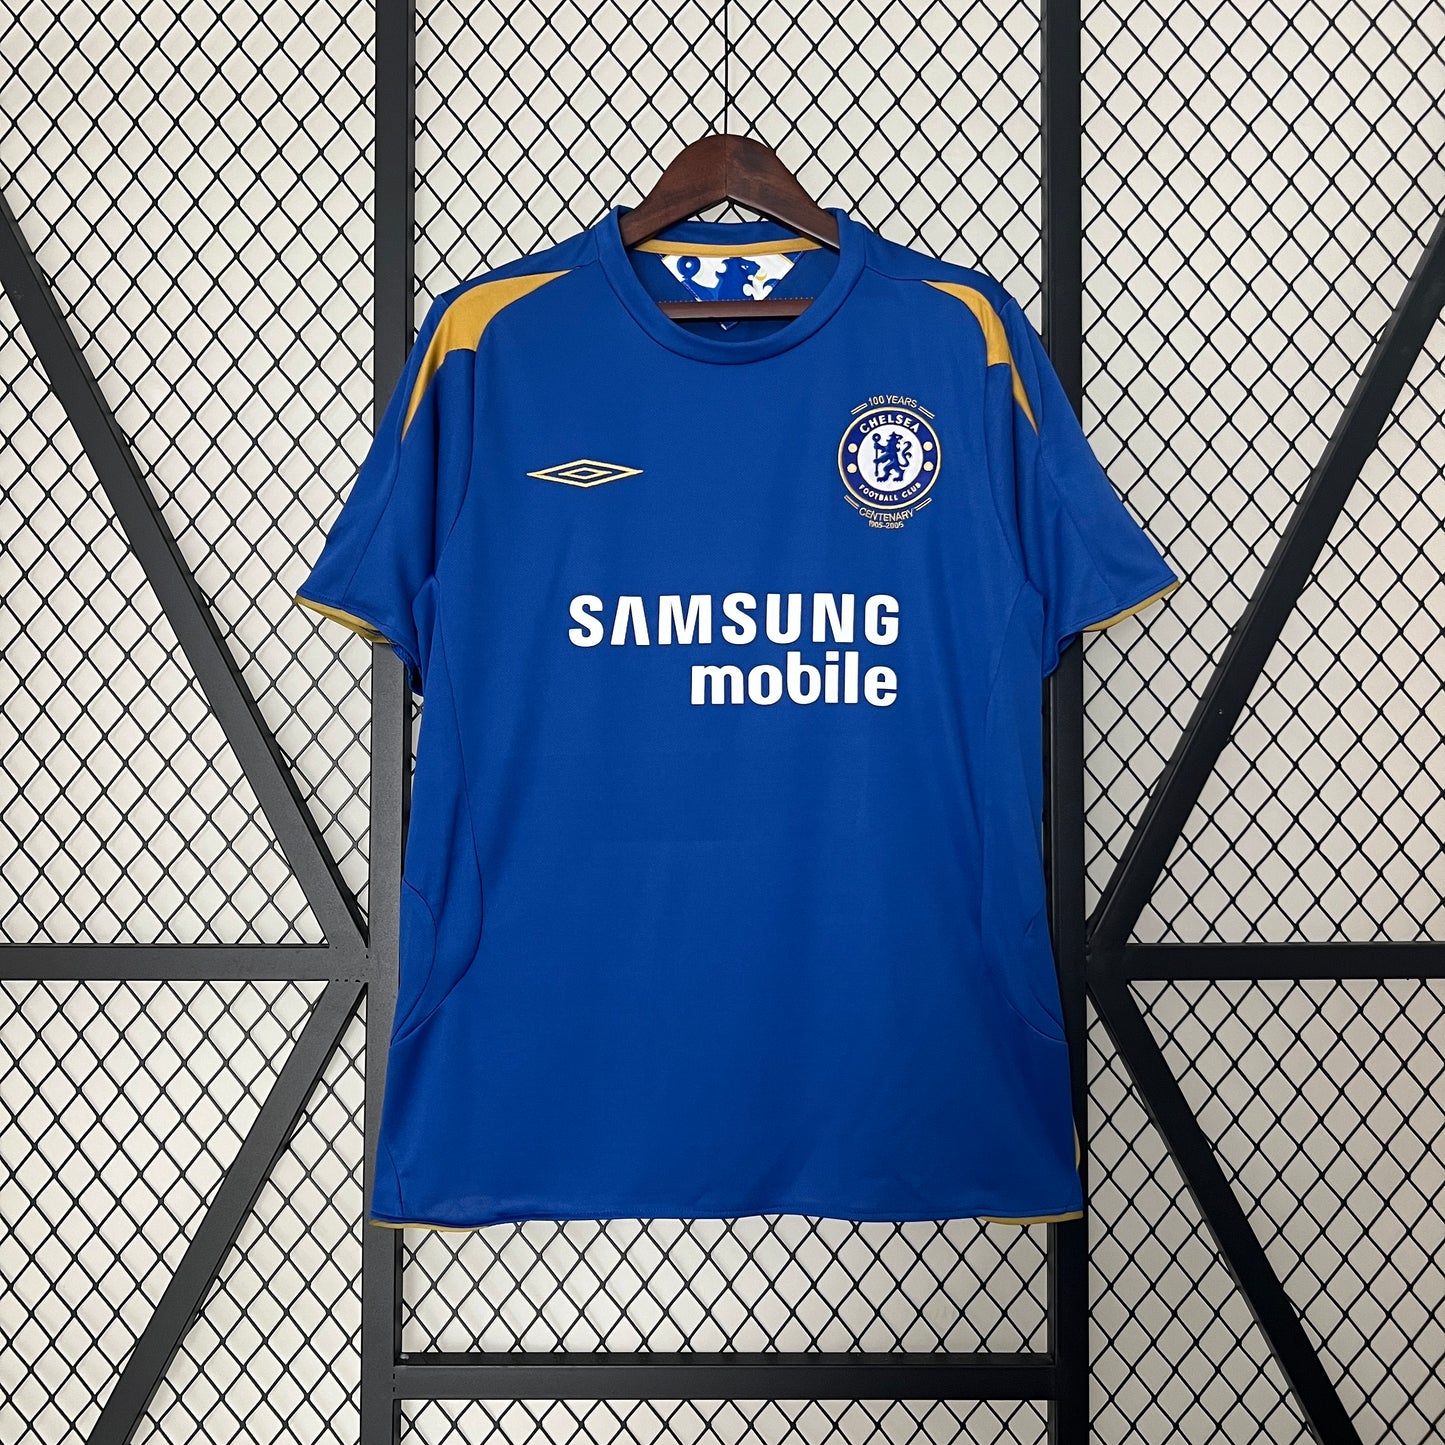 CHELSEA 2005 - 2006 HOME JERSEY